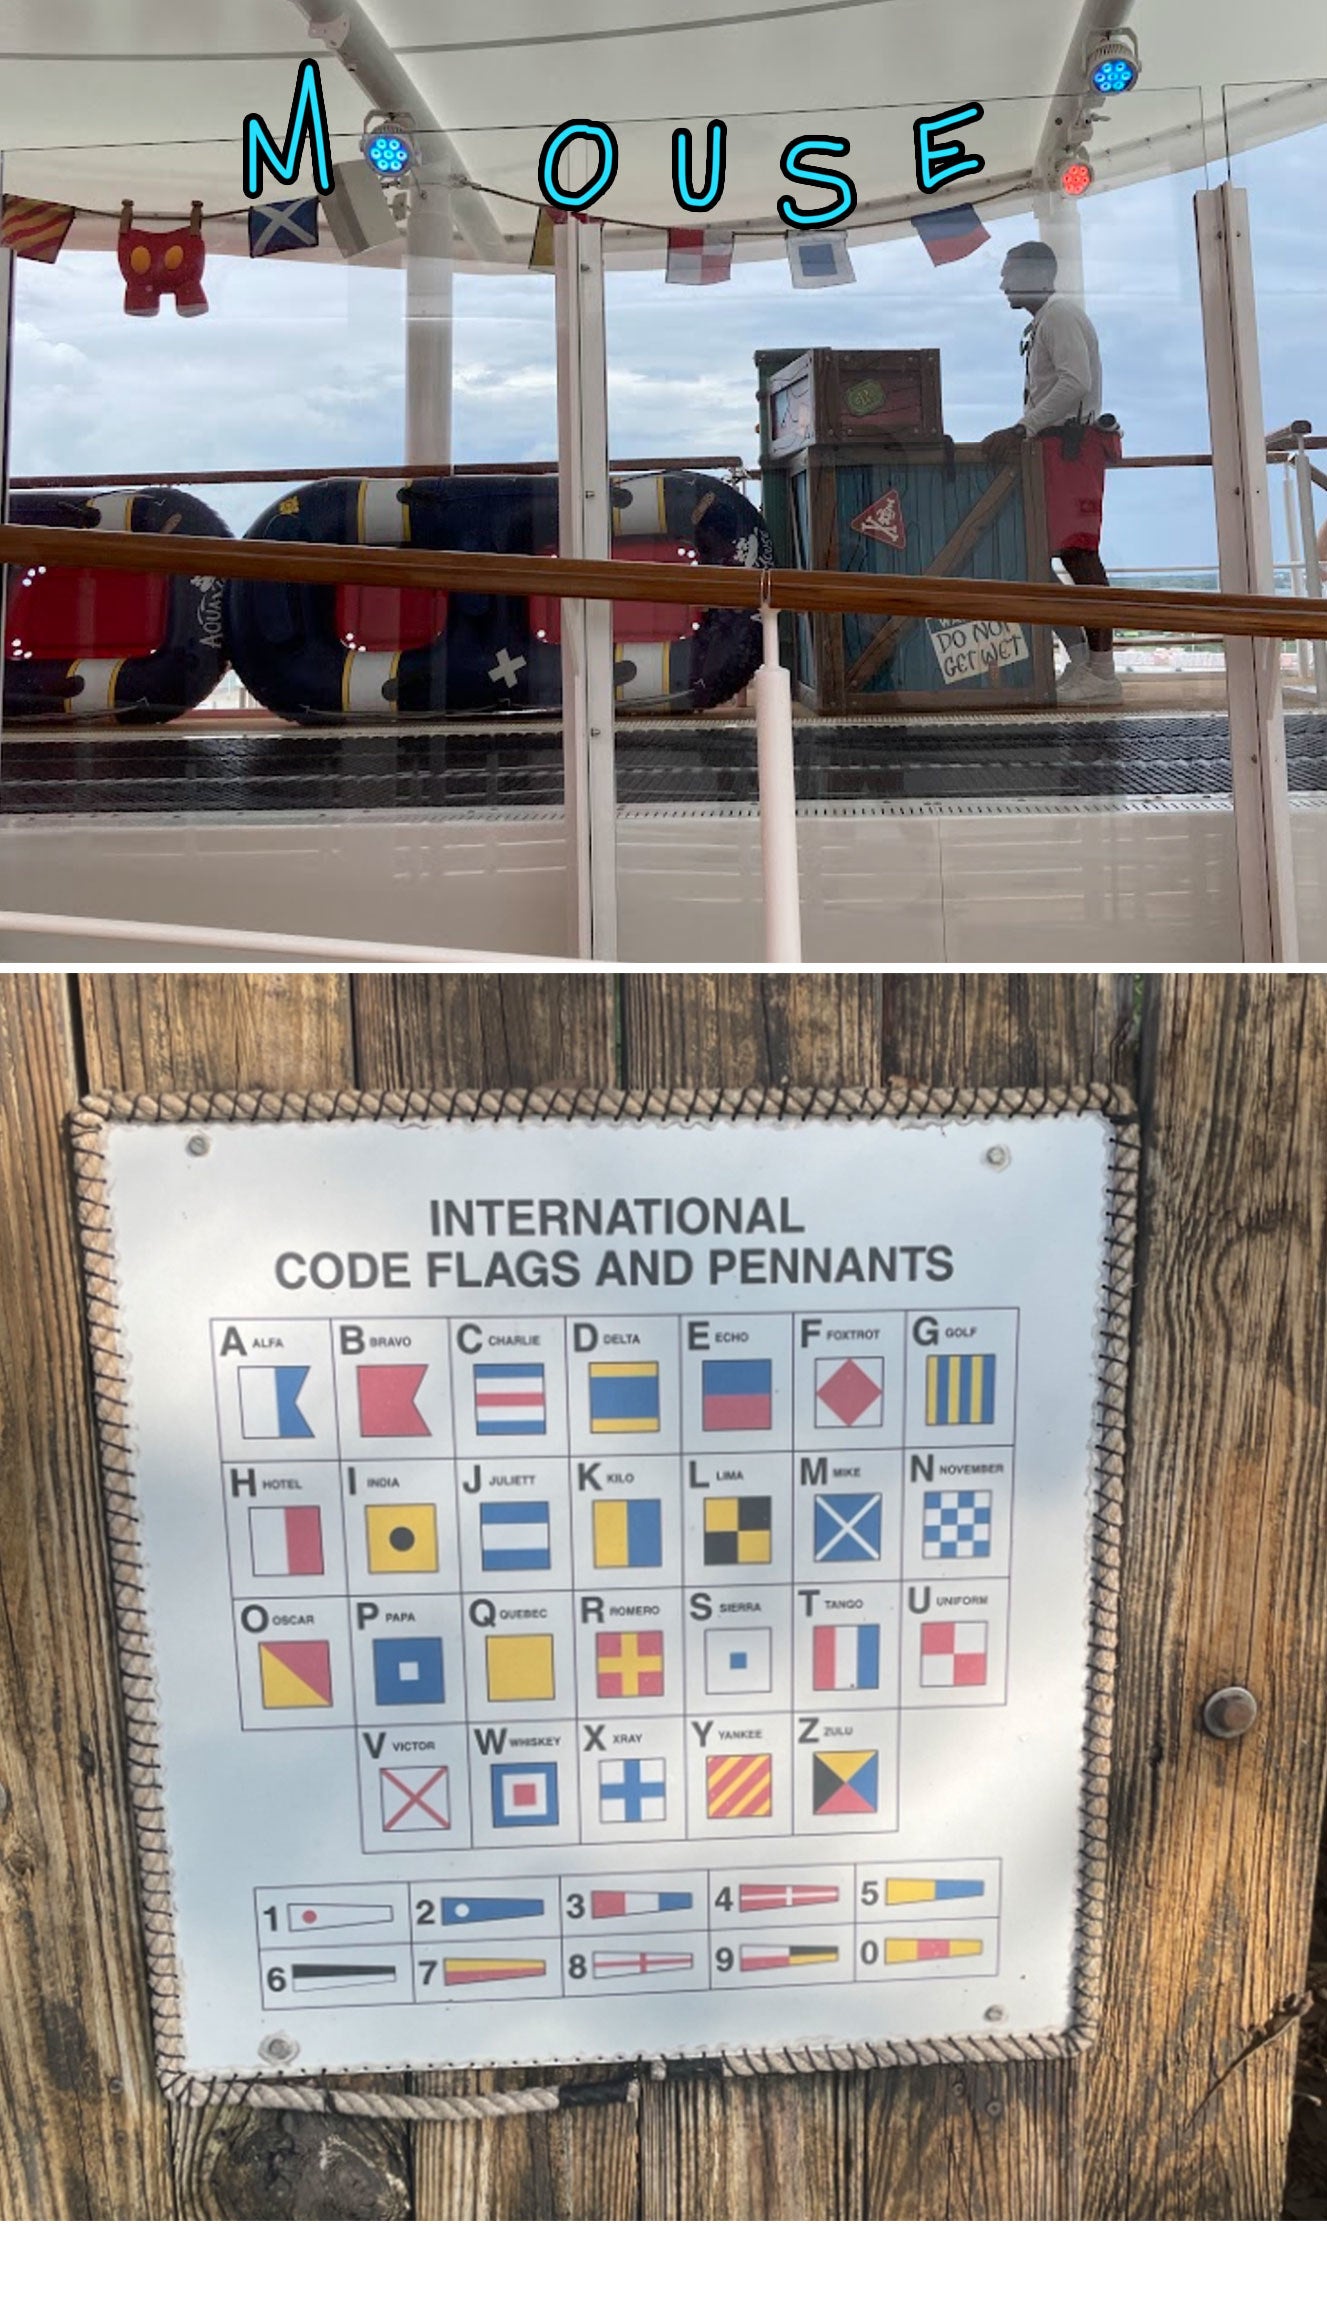 the international code flags and pennants sign